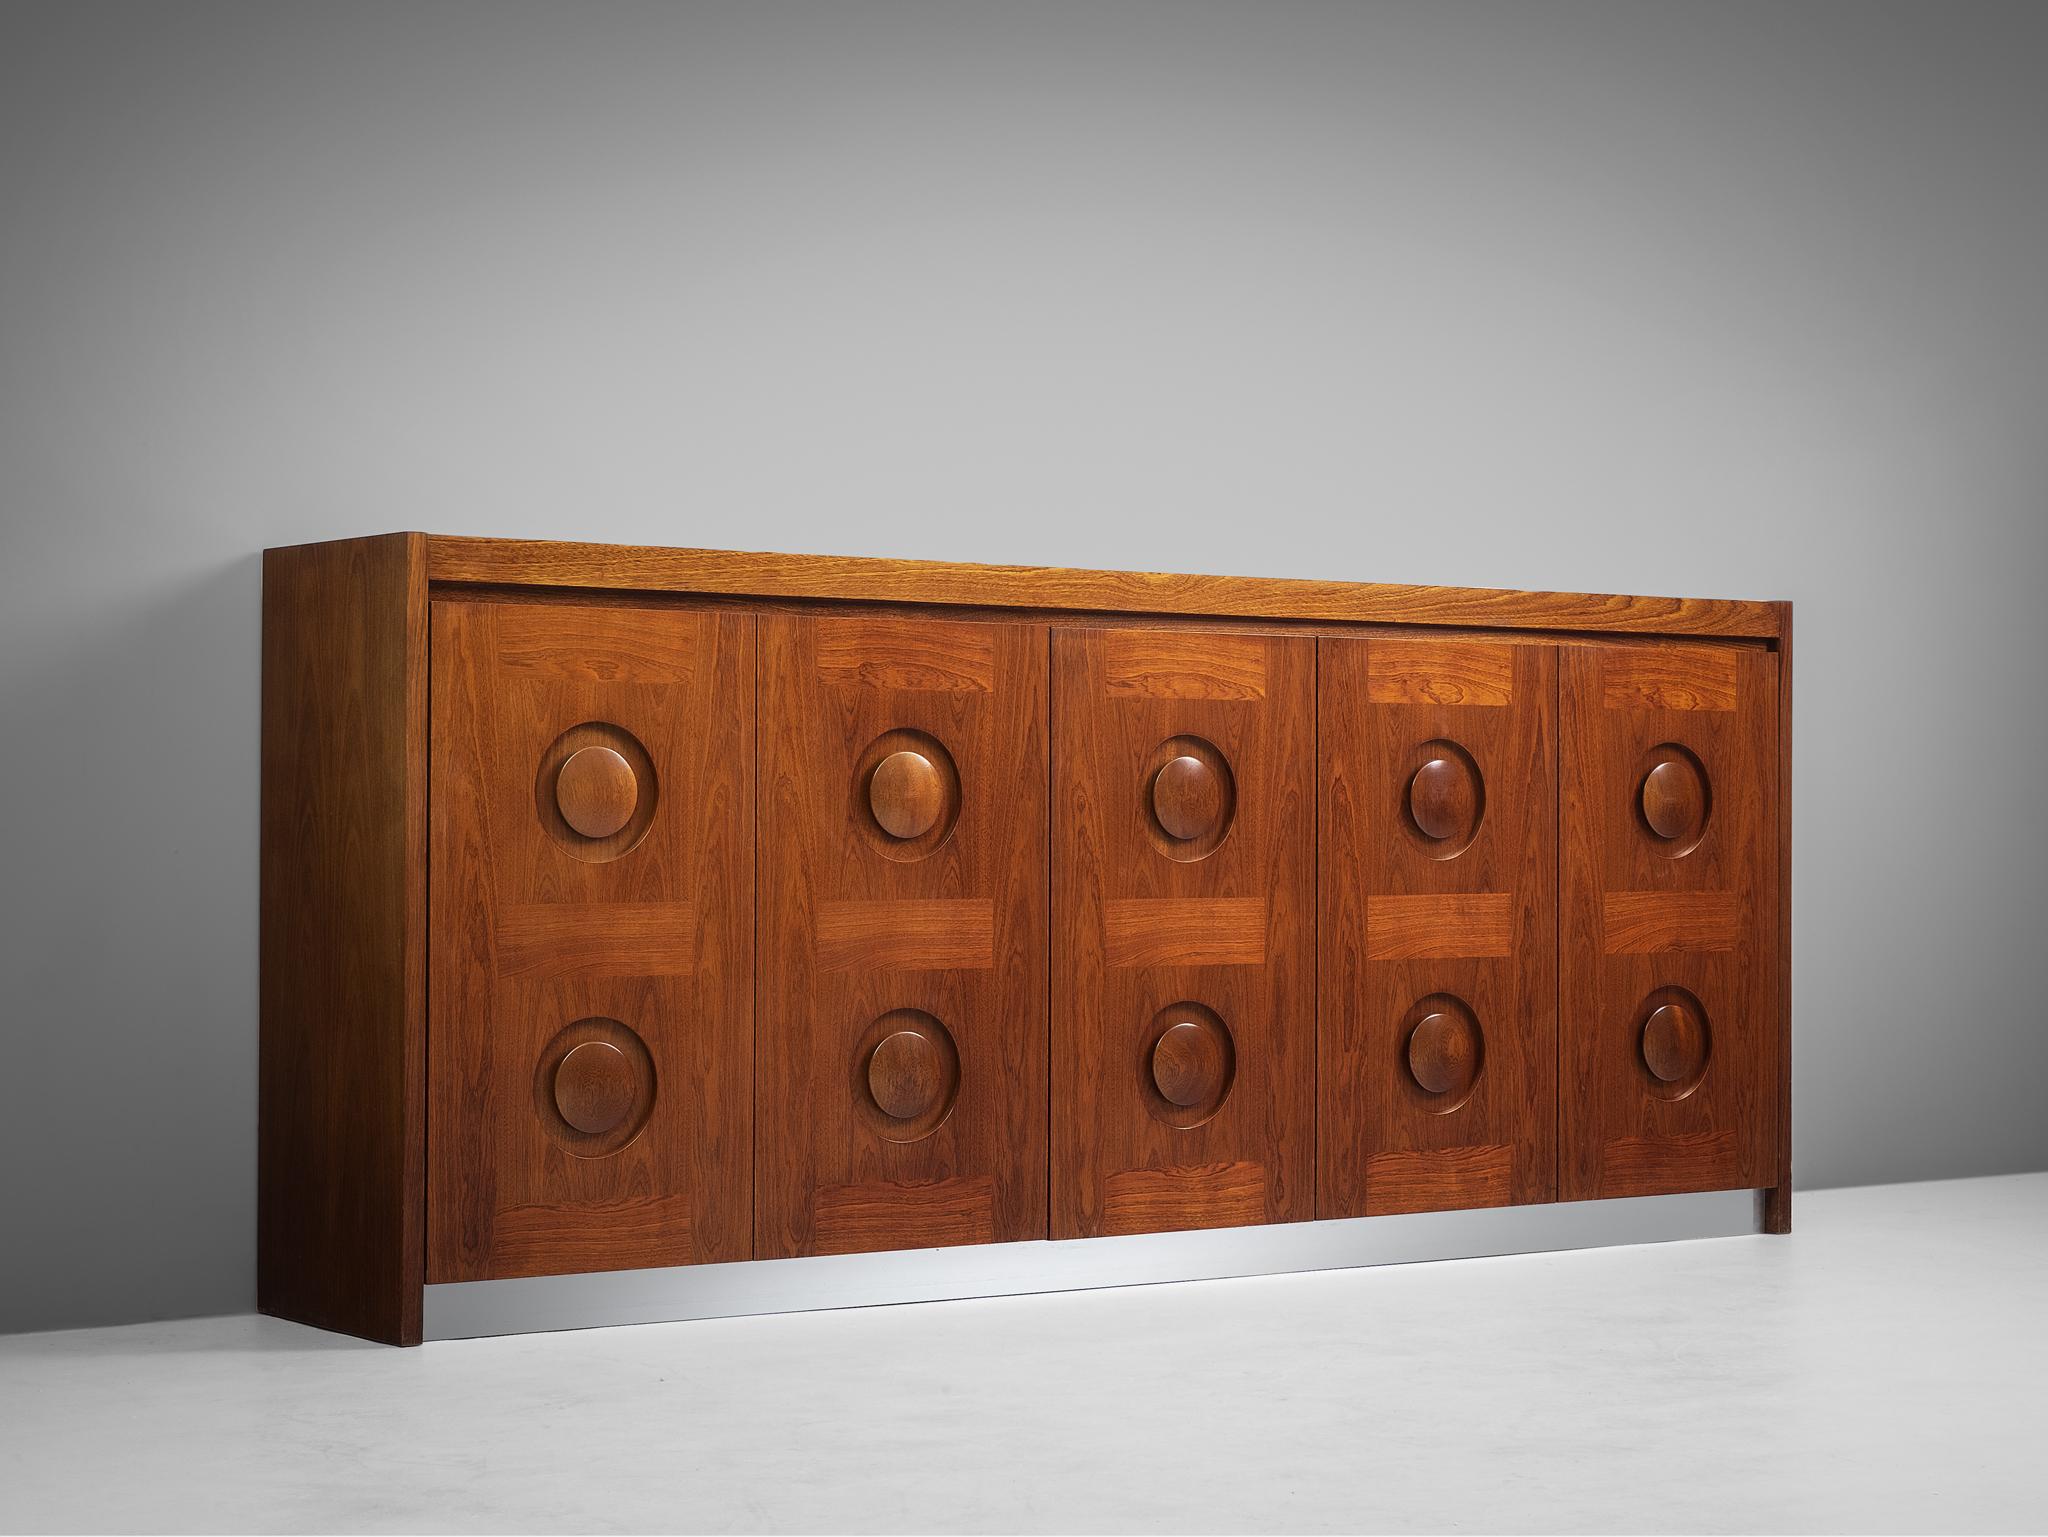 Brown Brutalist credenza in mahogany and aluminum, European, 1970s. 

Sturdy credenza in mahogany with graphical designed door panels. Five-door panels, each with a three-dimensional pattern of circles horizontal lines, which gives the cabinet a